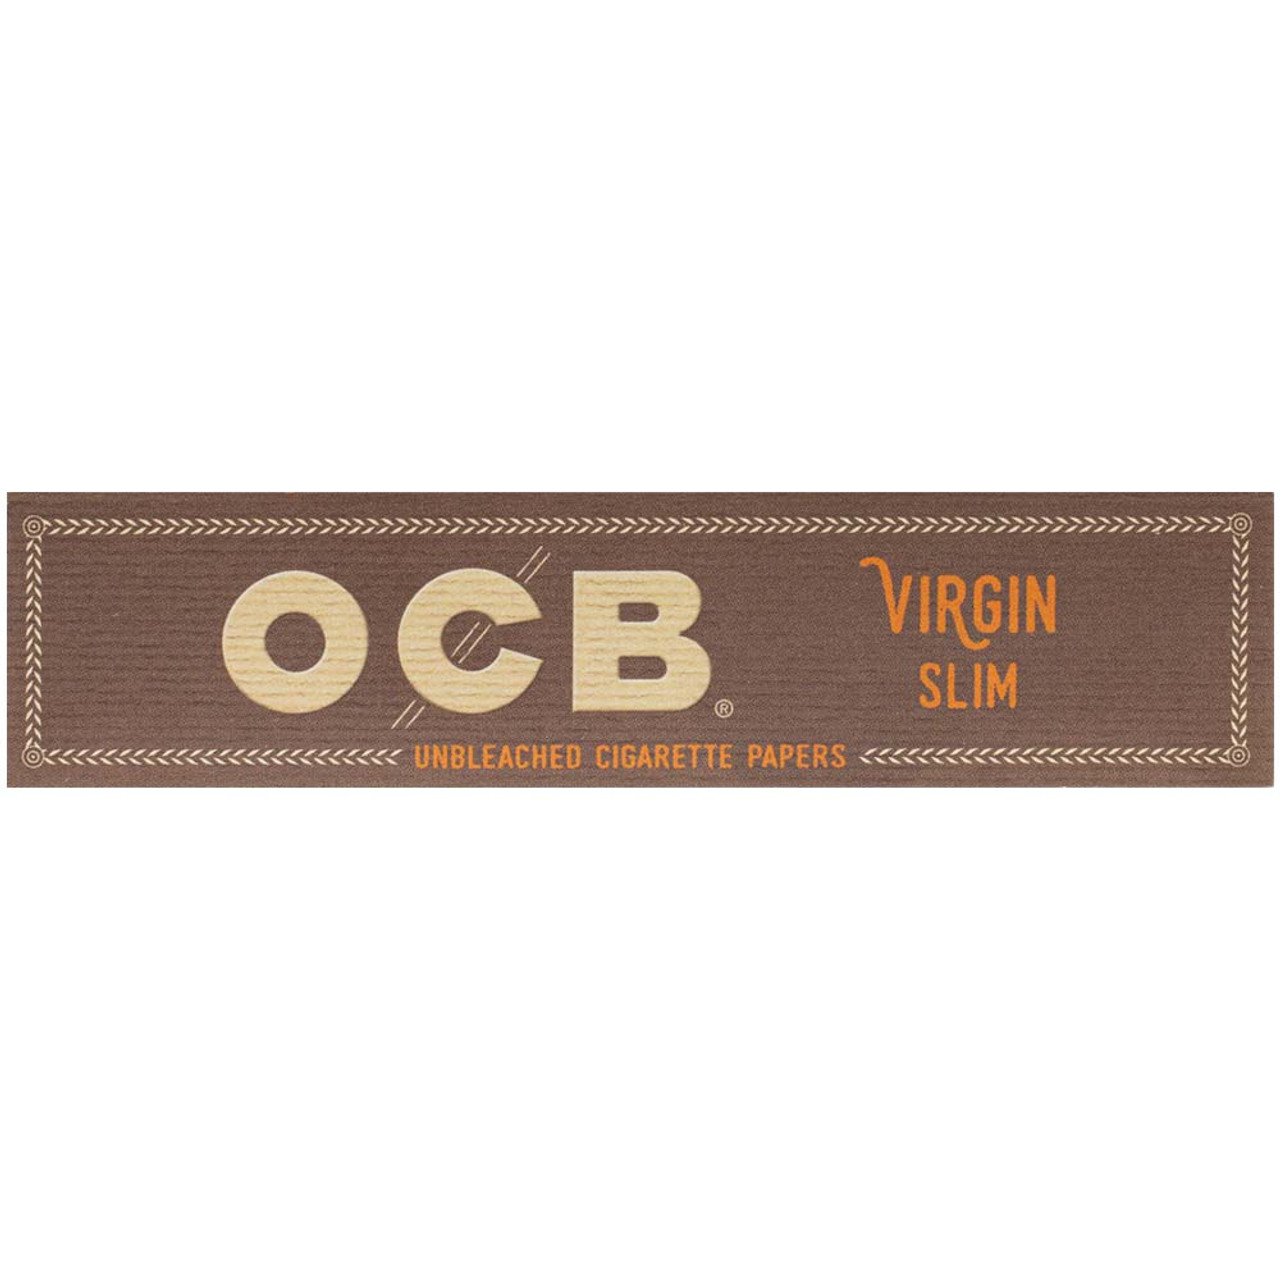 https://cdn11.bigcommerce.com/s-1n8r405nxd/images/stencil/1280x1280/products/10011/24257/86002-1-OCB-Virgin-Slim-Rolling-Papers-Single-pack-from-the-front__49715.1680535539.jpg?c=2